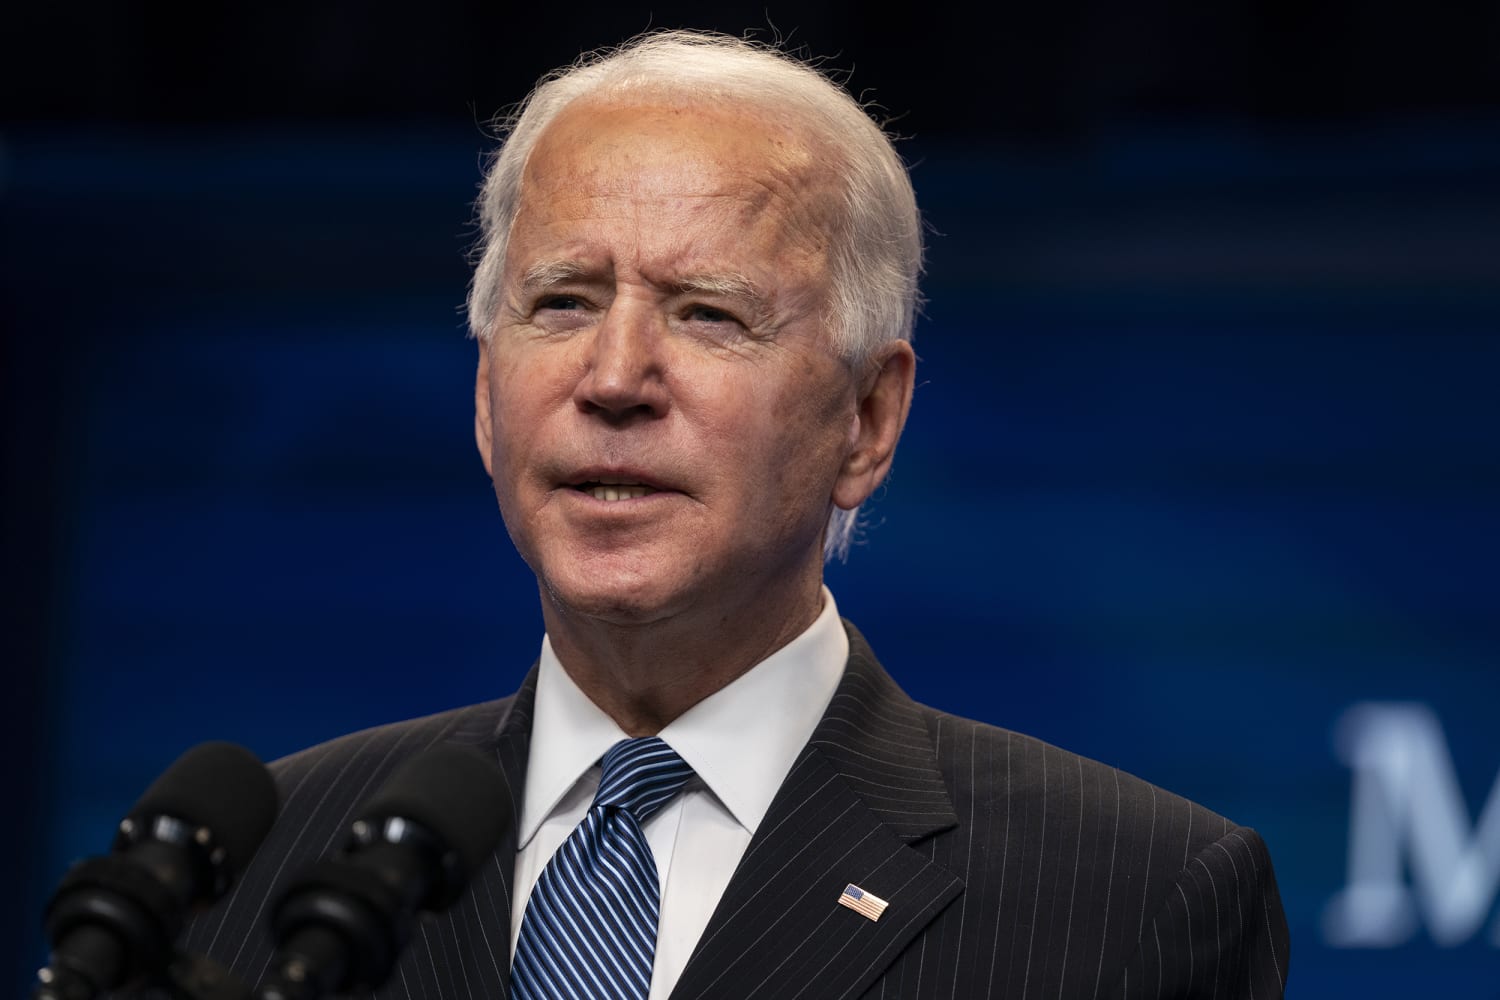 Biden plans executive action on police reform to revive stalled issue